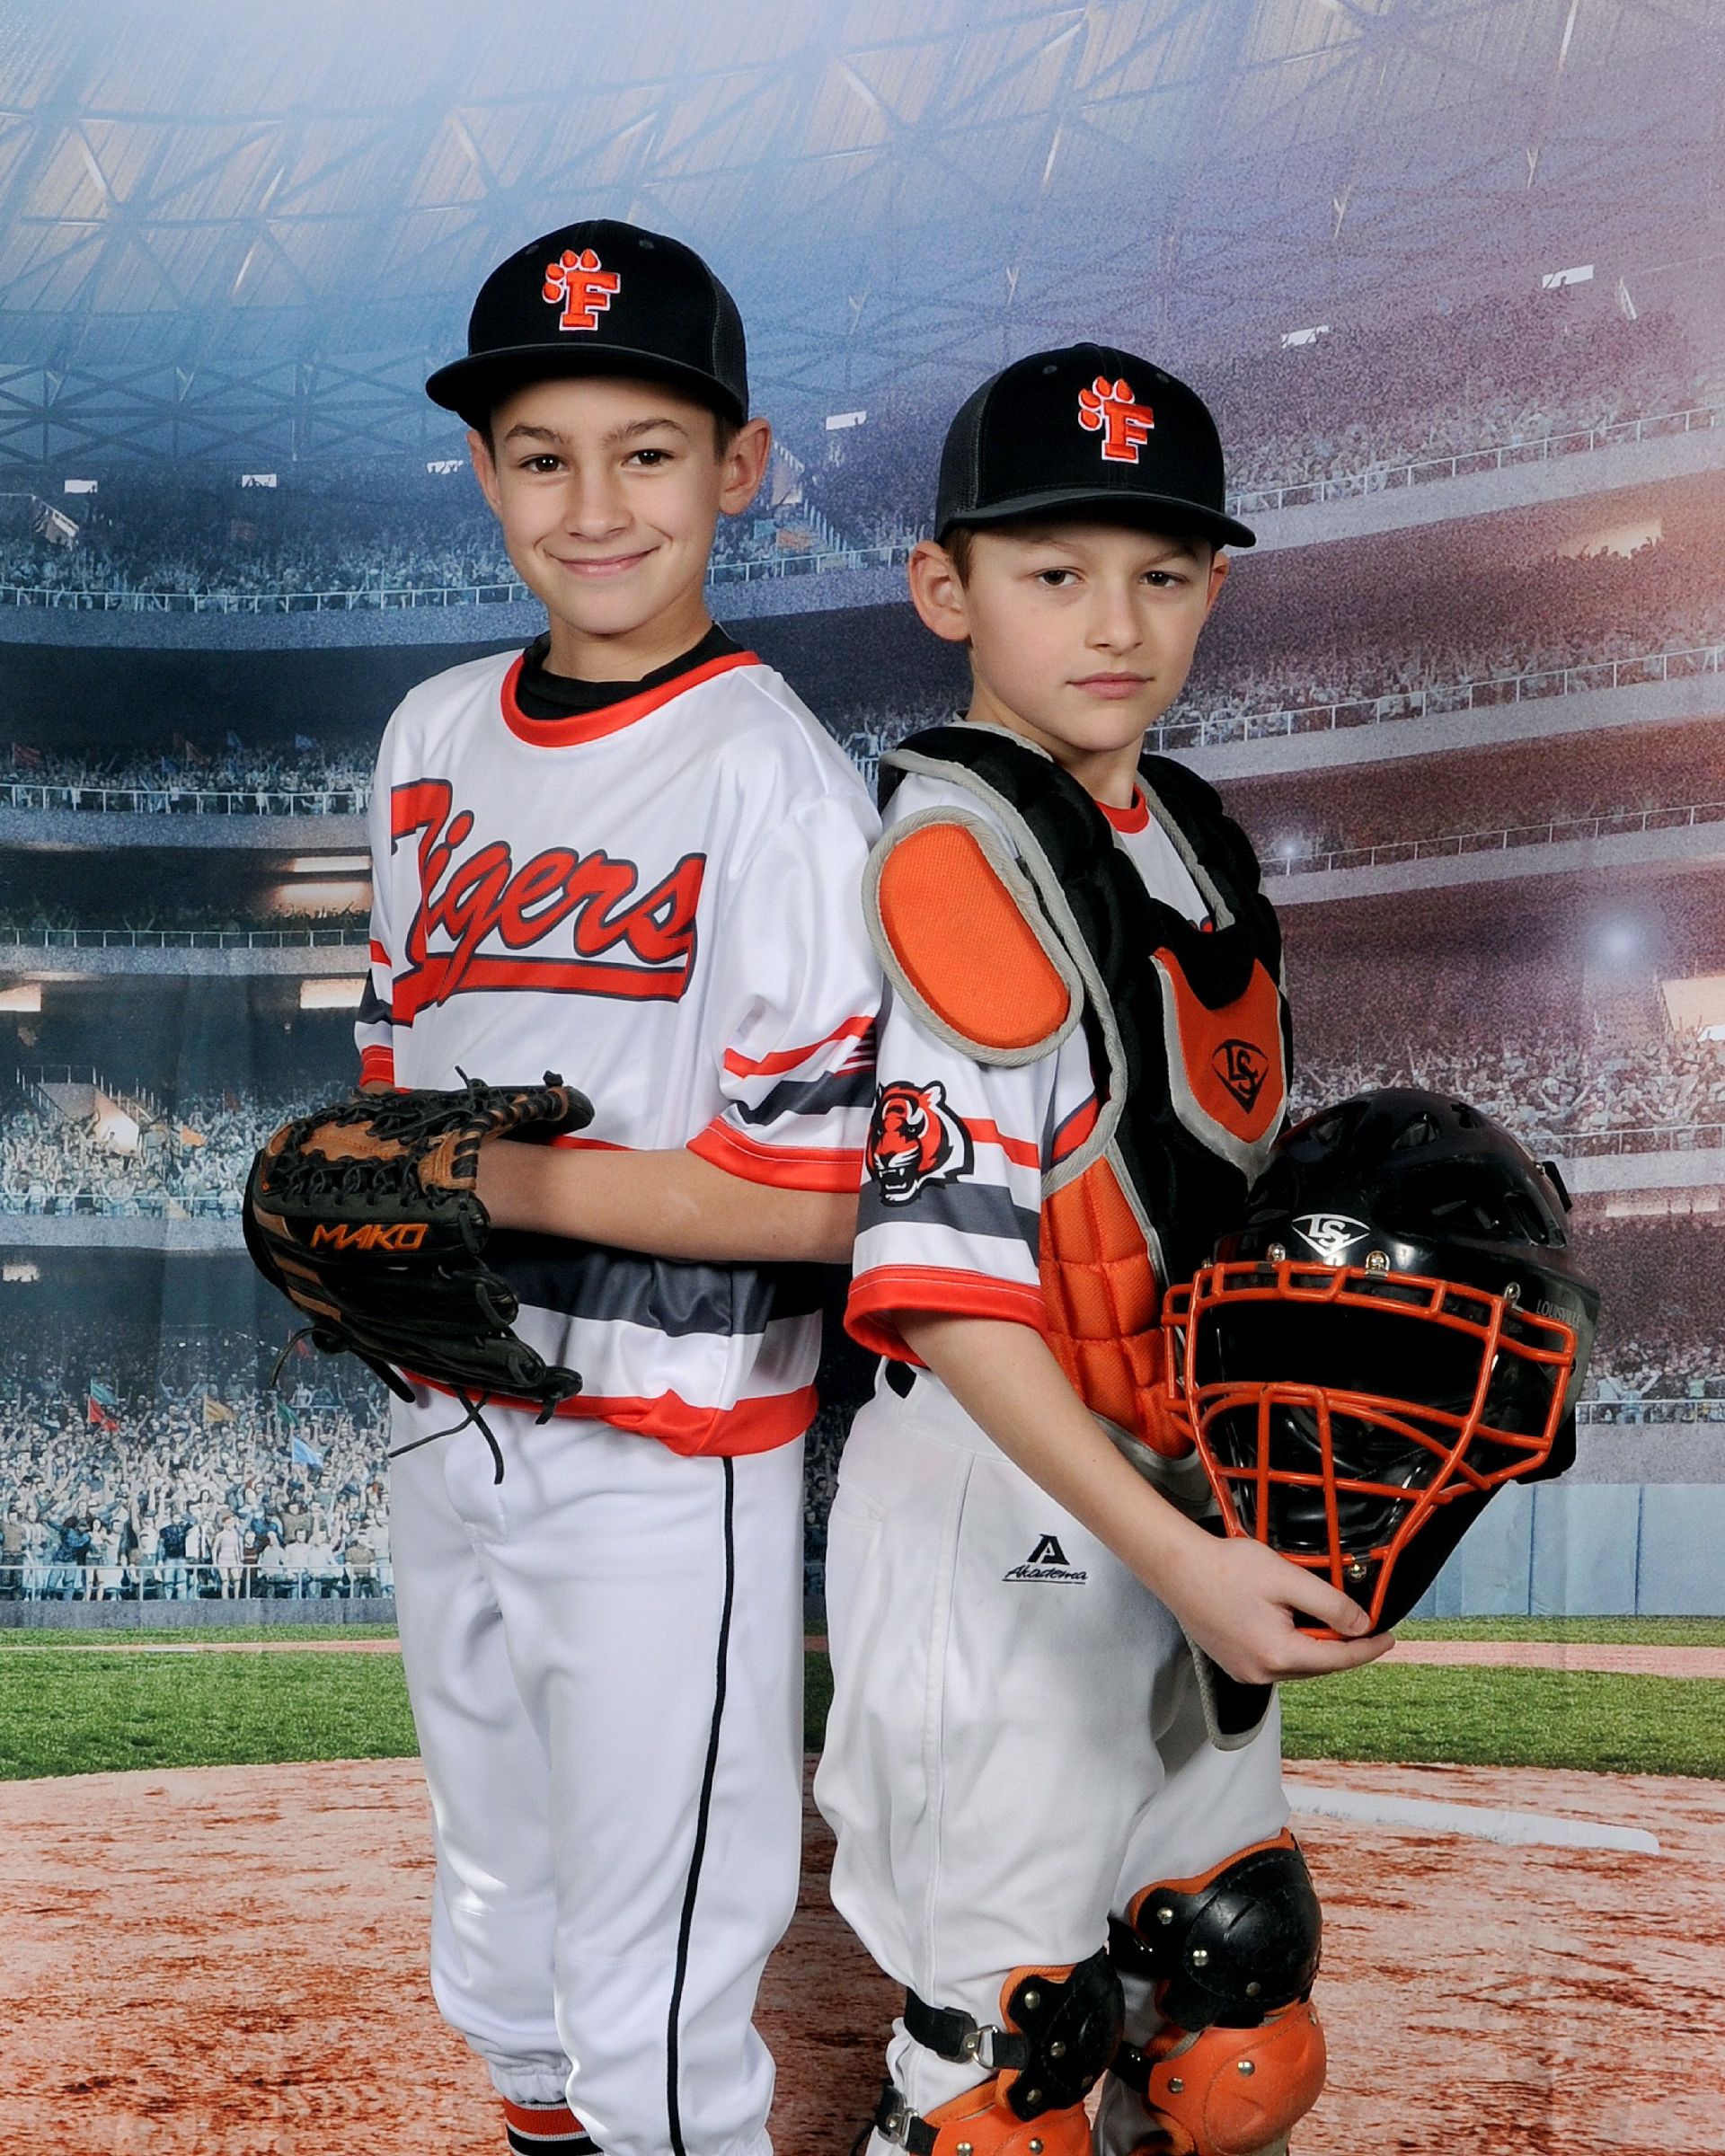 Kids Sports Photography Tips #HSPImaging